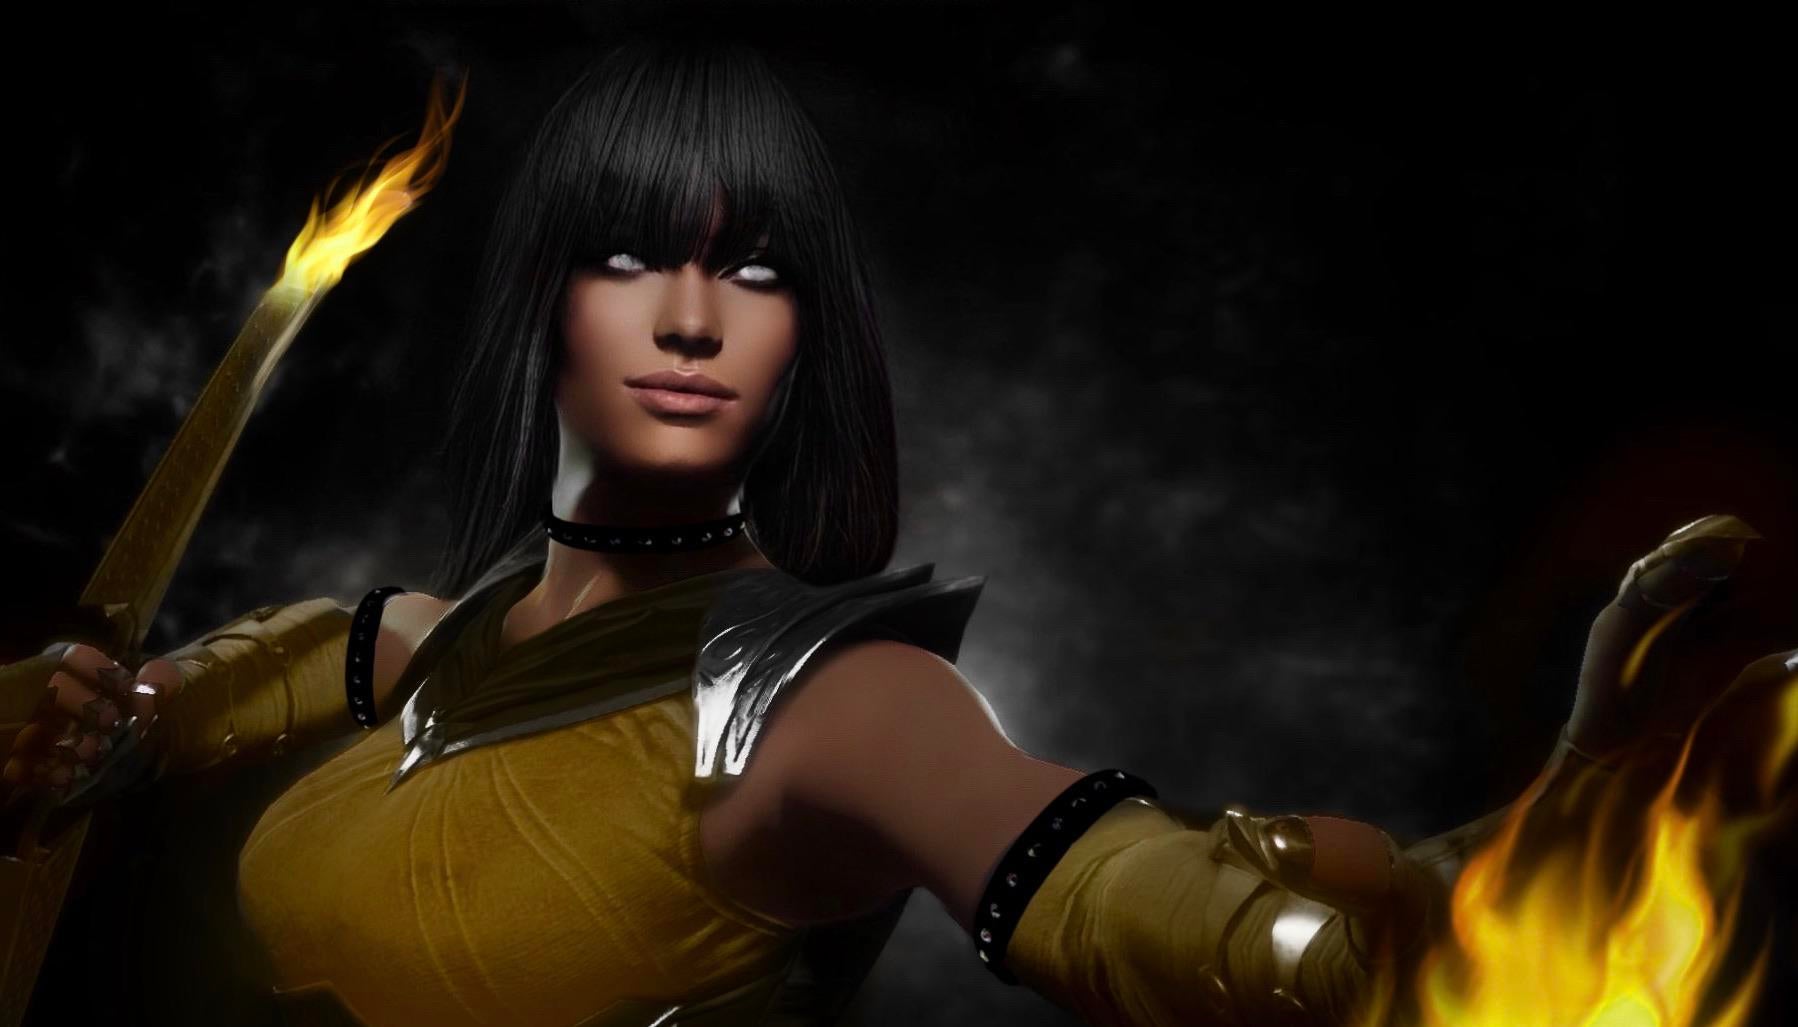 I attempted to edit Tanya into MK11